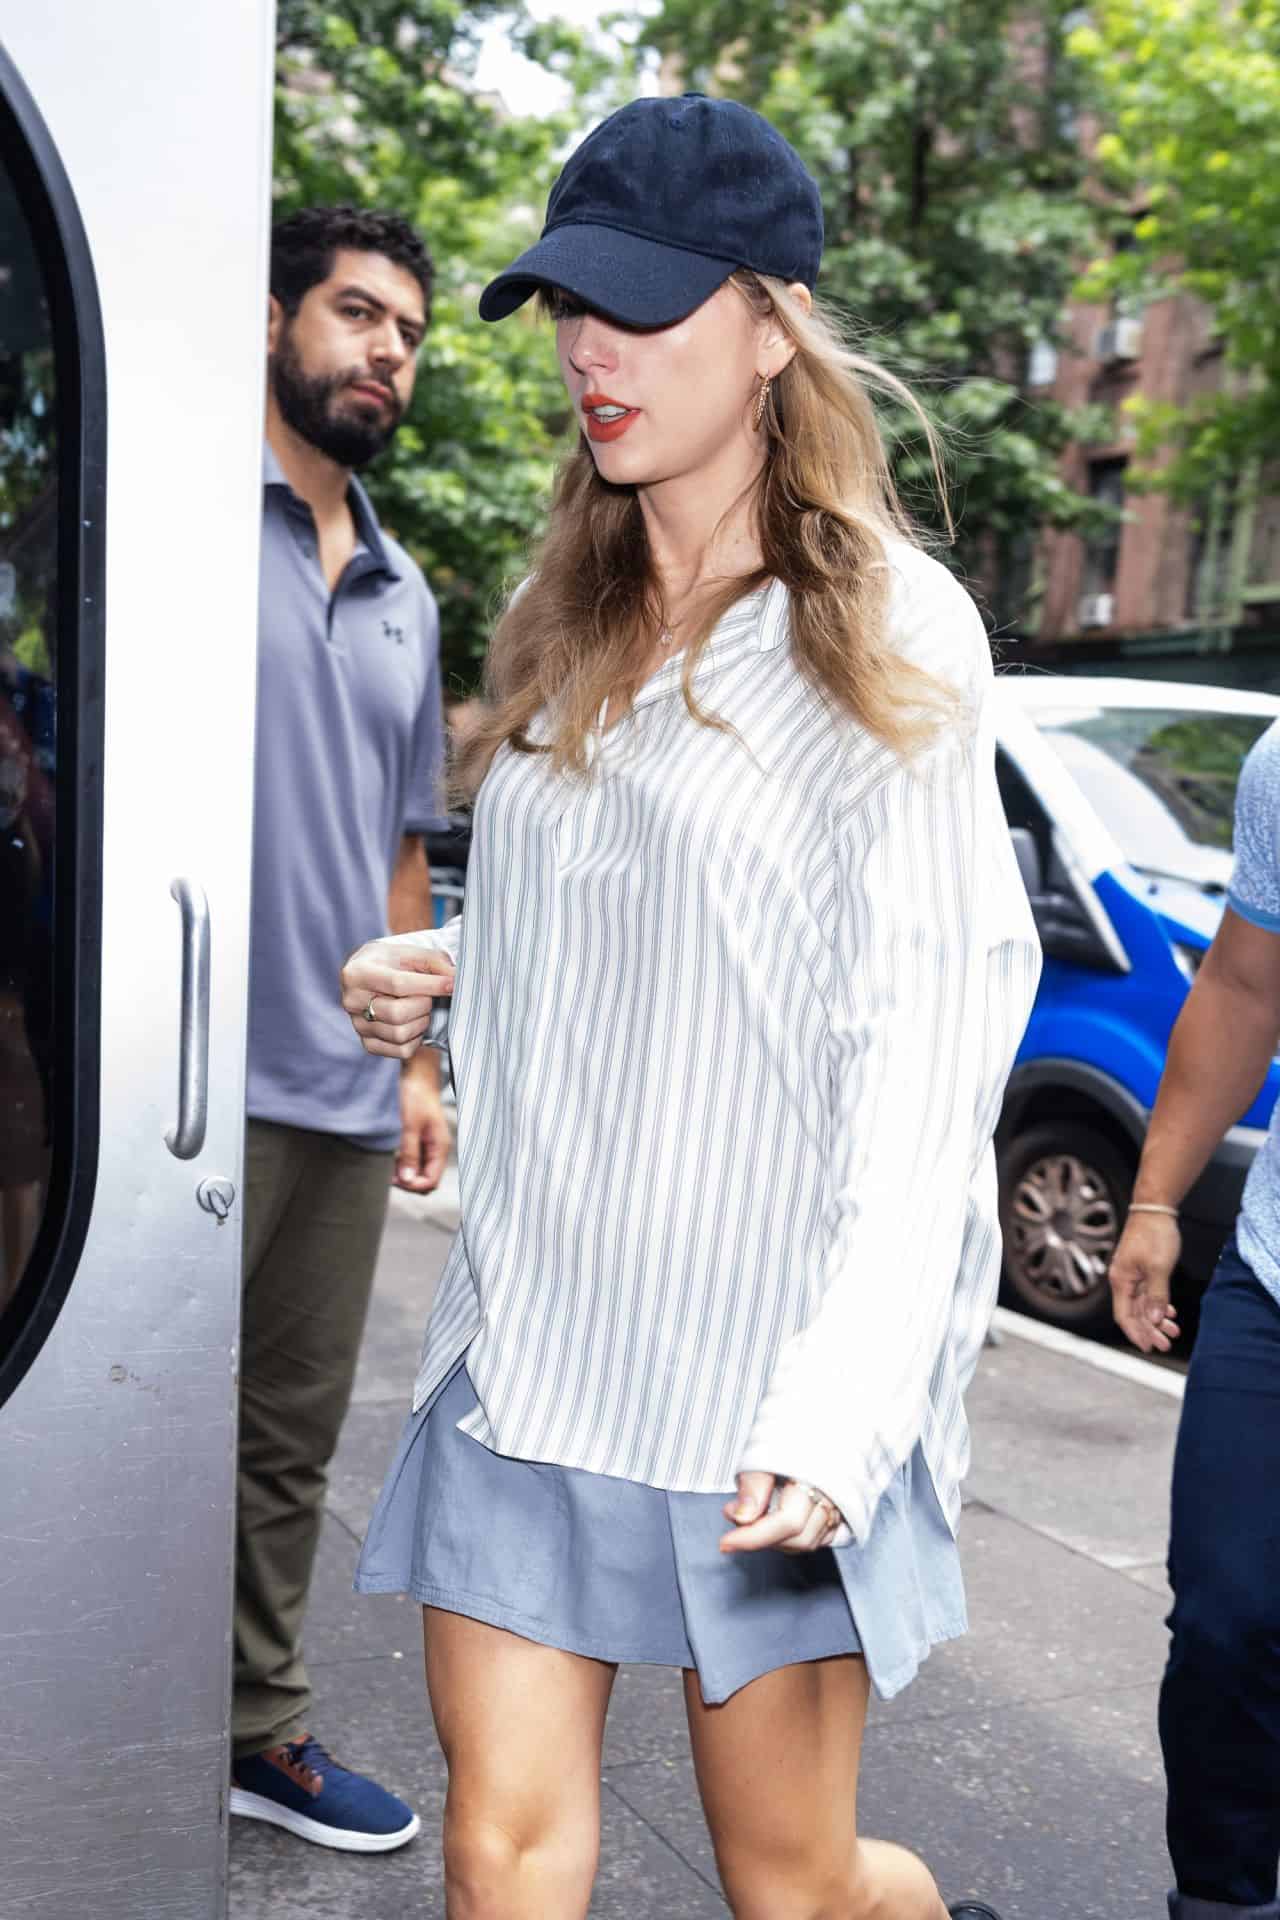 Taylor Swift Brings Summer Style with Striped Shirt and Mini Skirt in NY